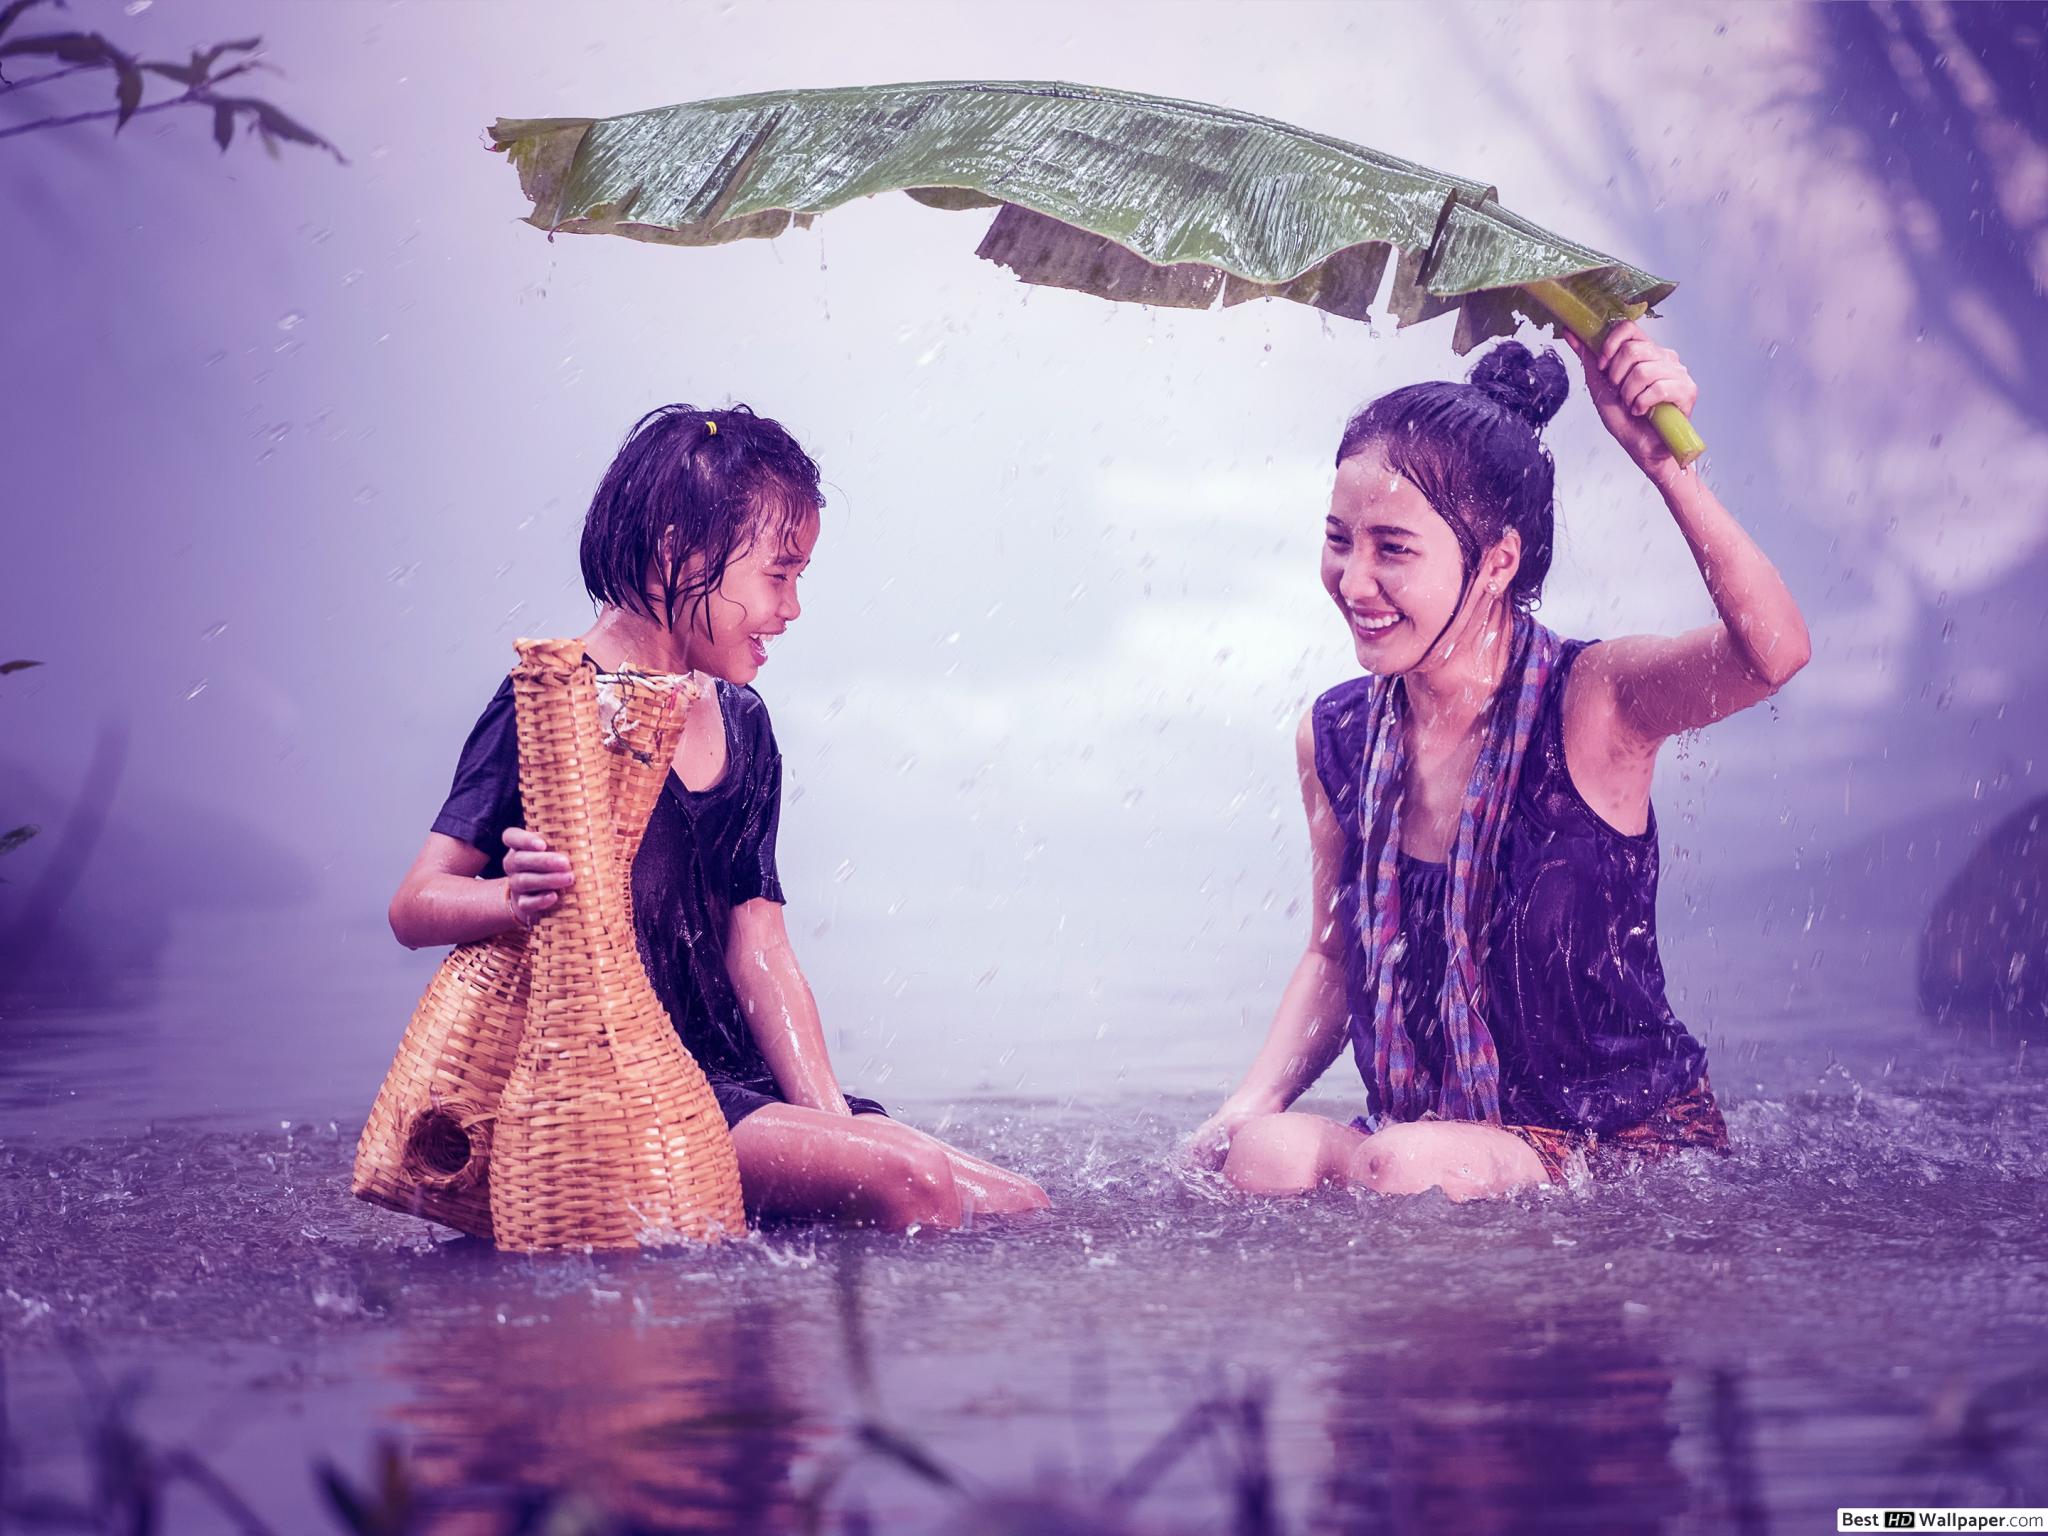 Mother and Daughter soaking in the rain HD wallpaper download